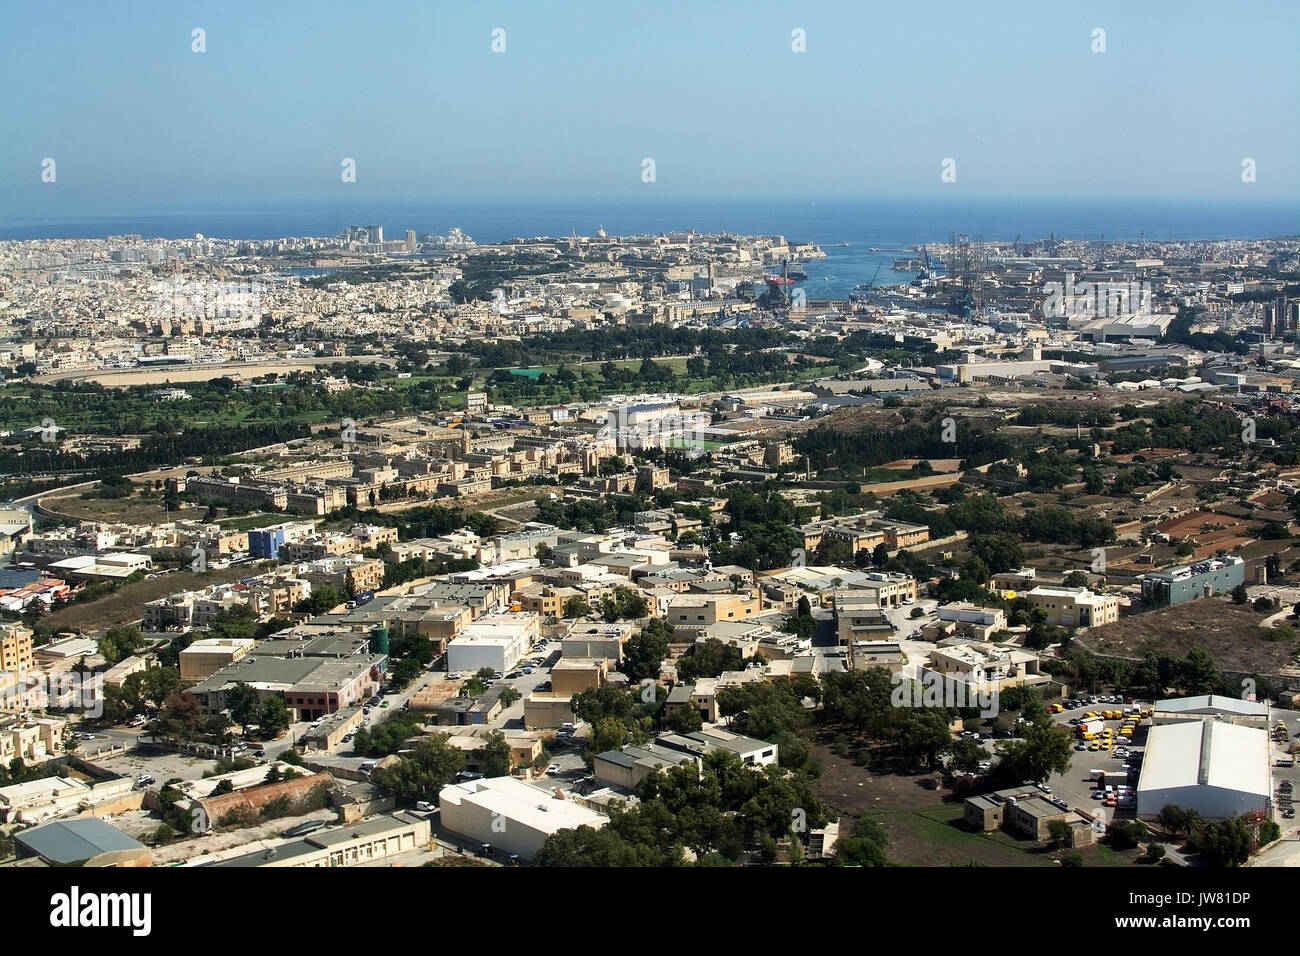 MALTA, EUROPE - SEPTEMBER 17, 2015: Takeoff with view east over Valletta and St Julian's area on September 17, 2015 in Malta, Europe. Stock Photo